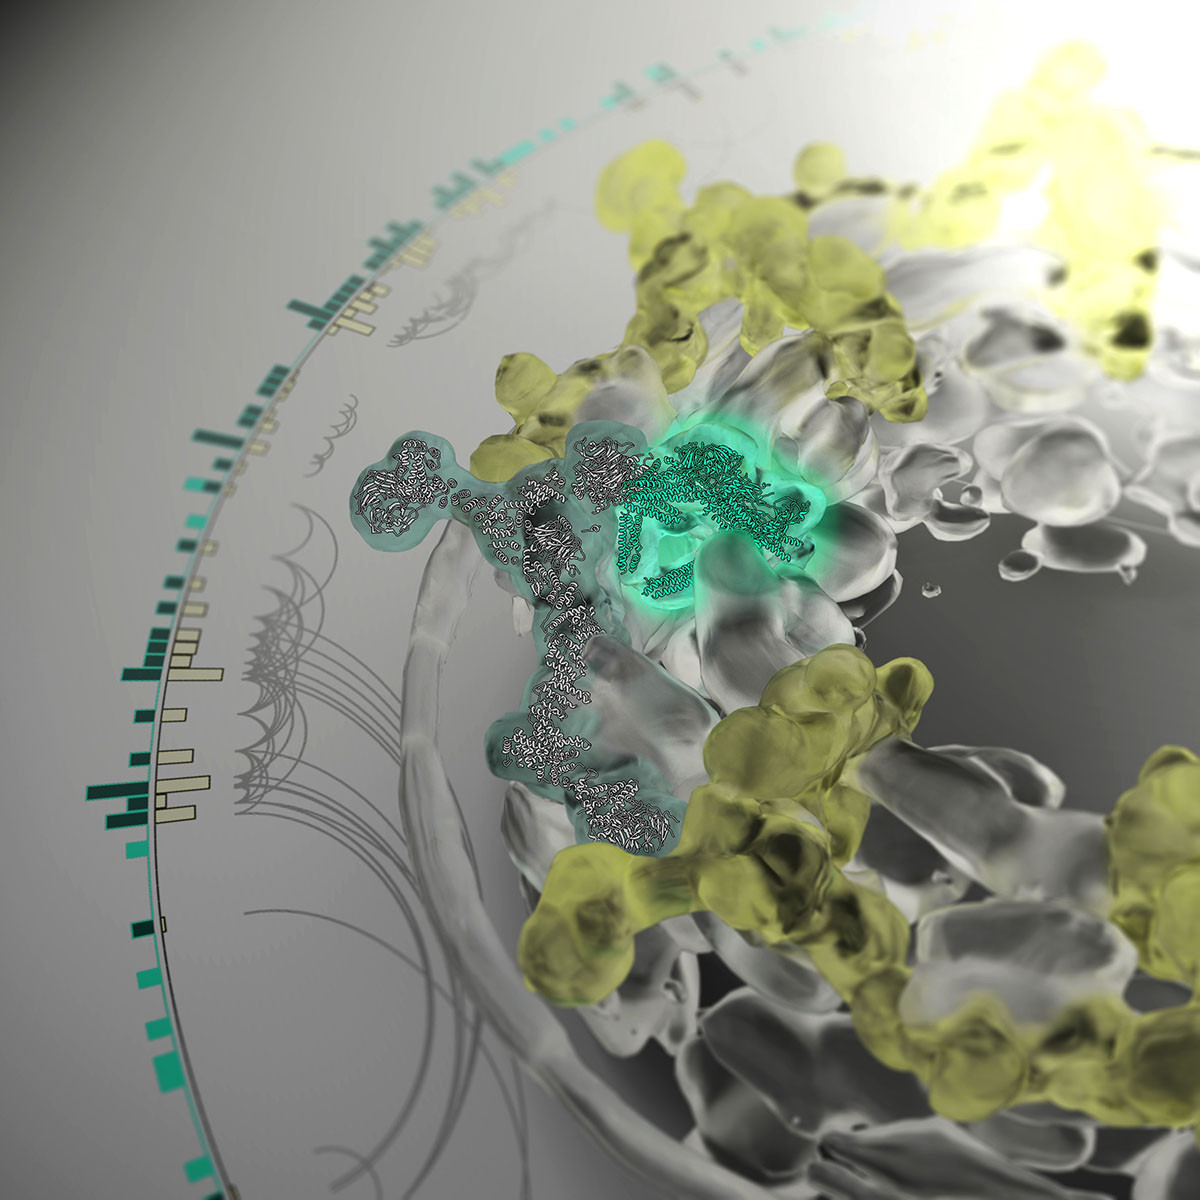 rendering of rna export platform in nuclear pore complex